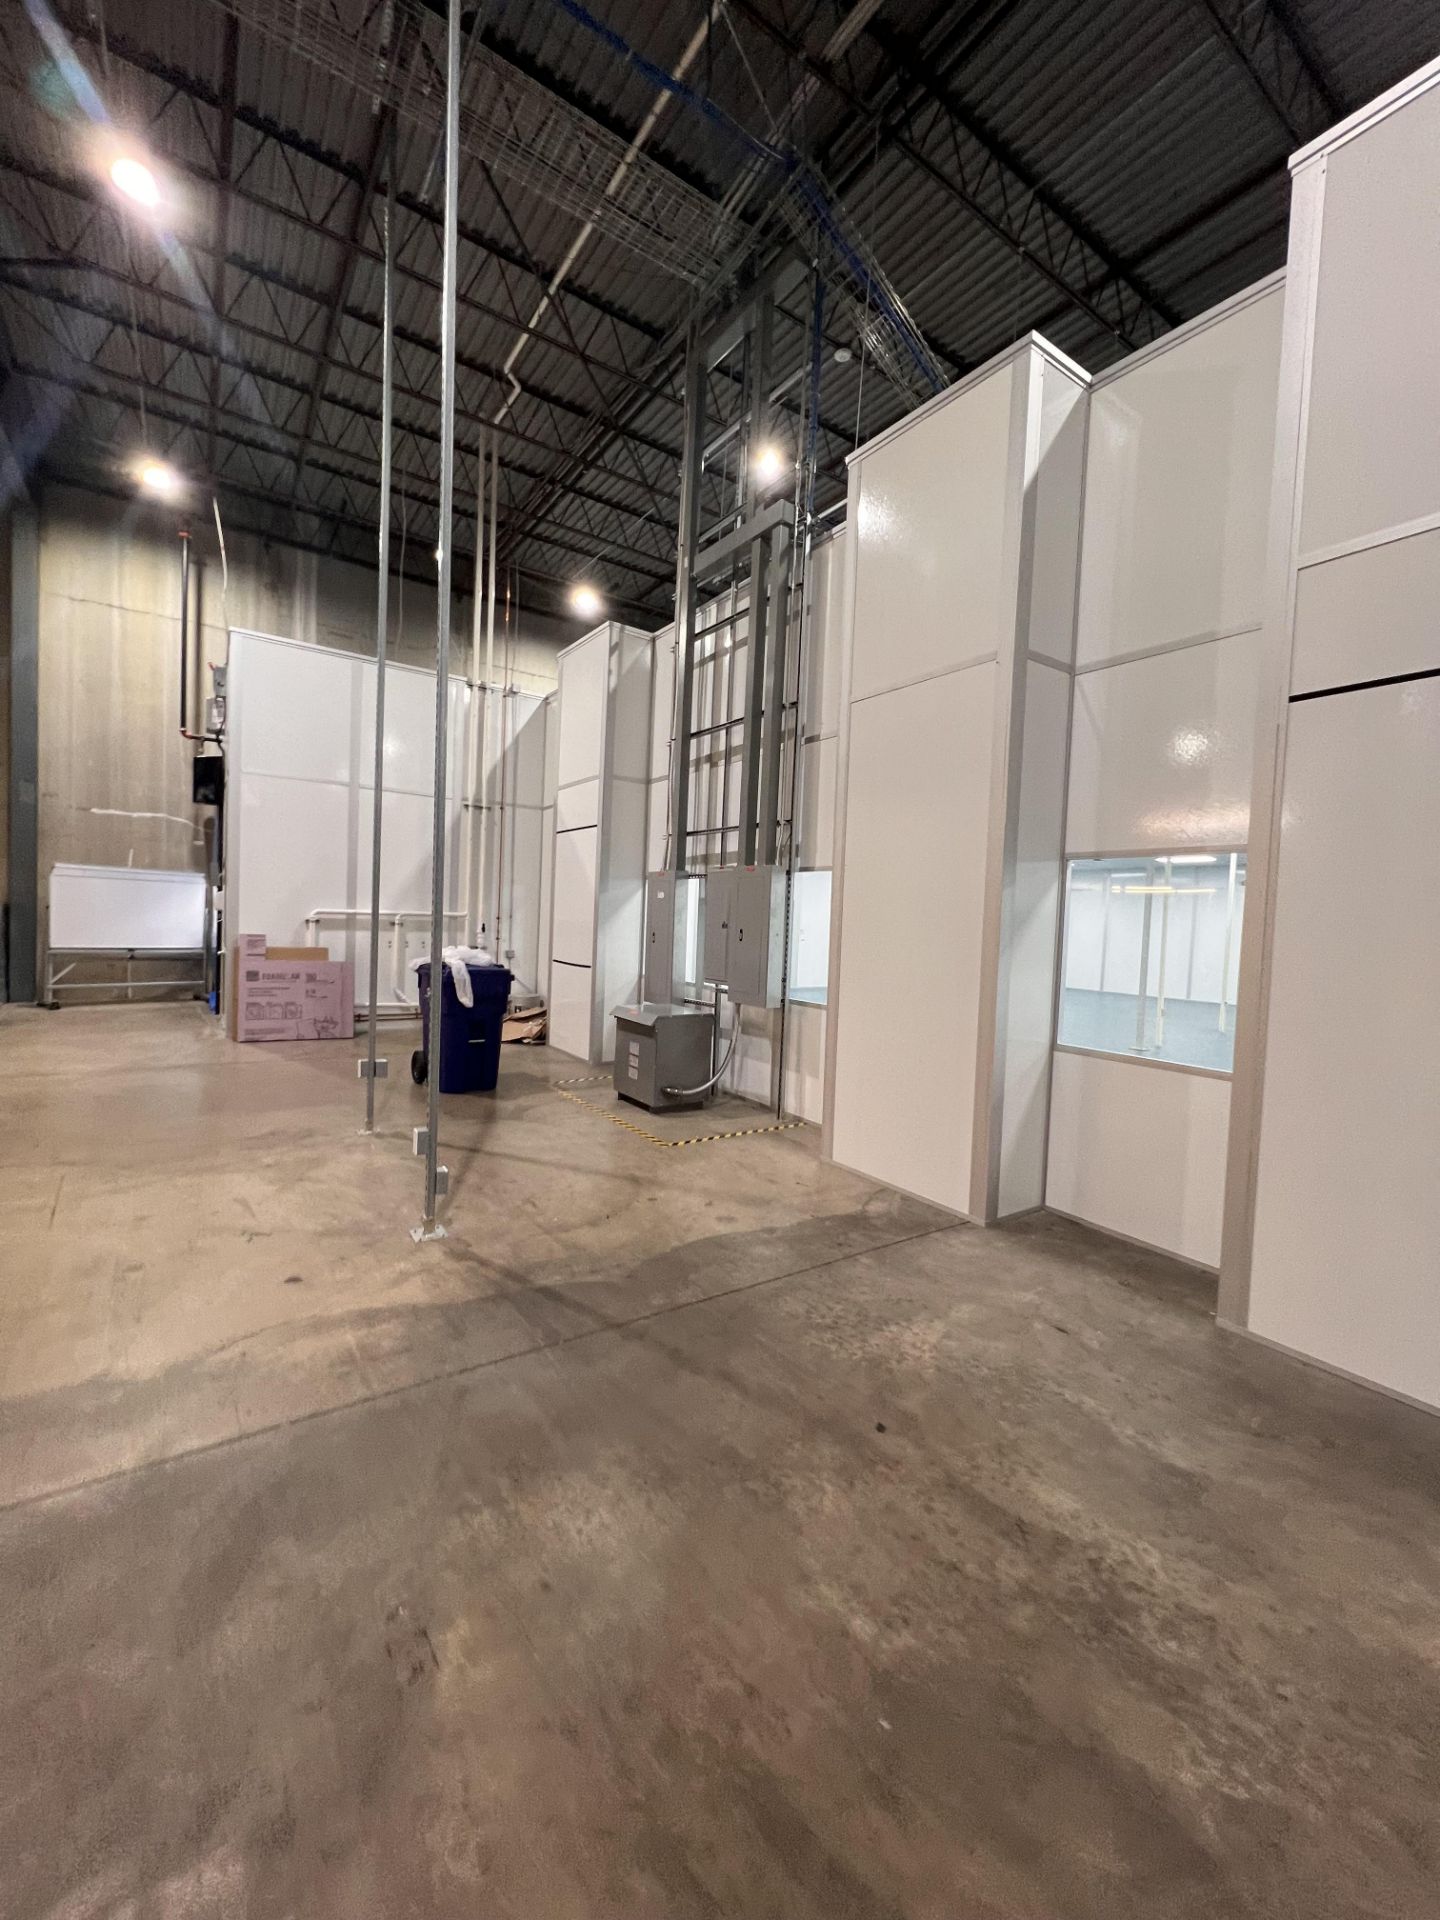 MODULAR CLEAN ROOM, APPROX. 60 FT X 60 FT X 11 FT 10 IN, INCLUDES HEPA FILTRATION UNITS - Image 13 of 34